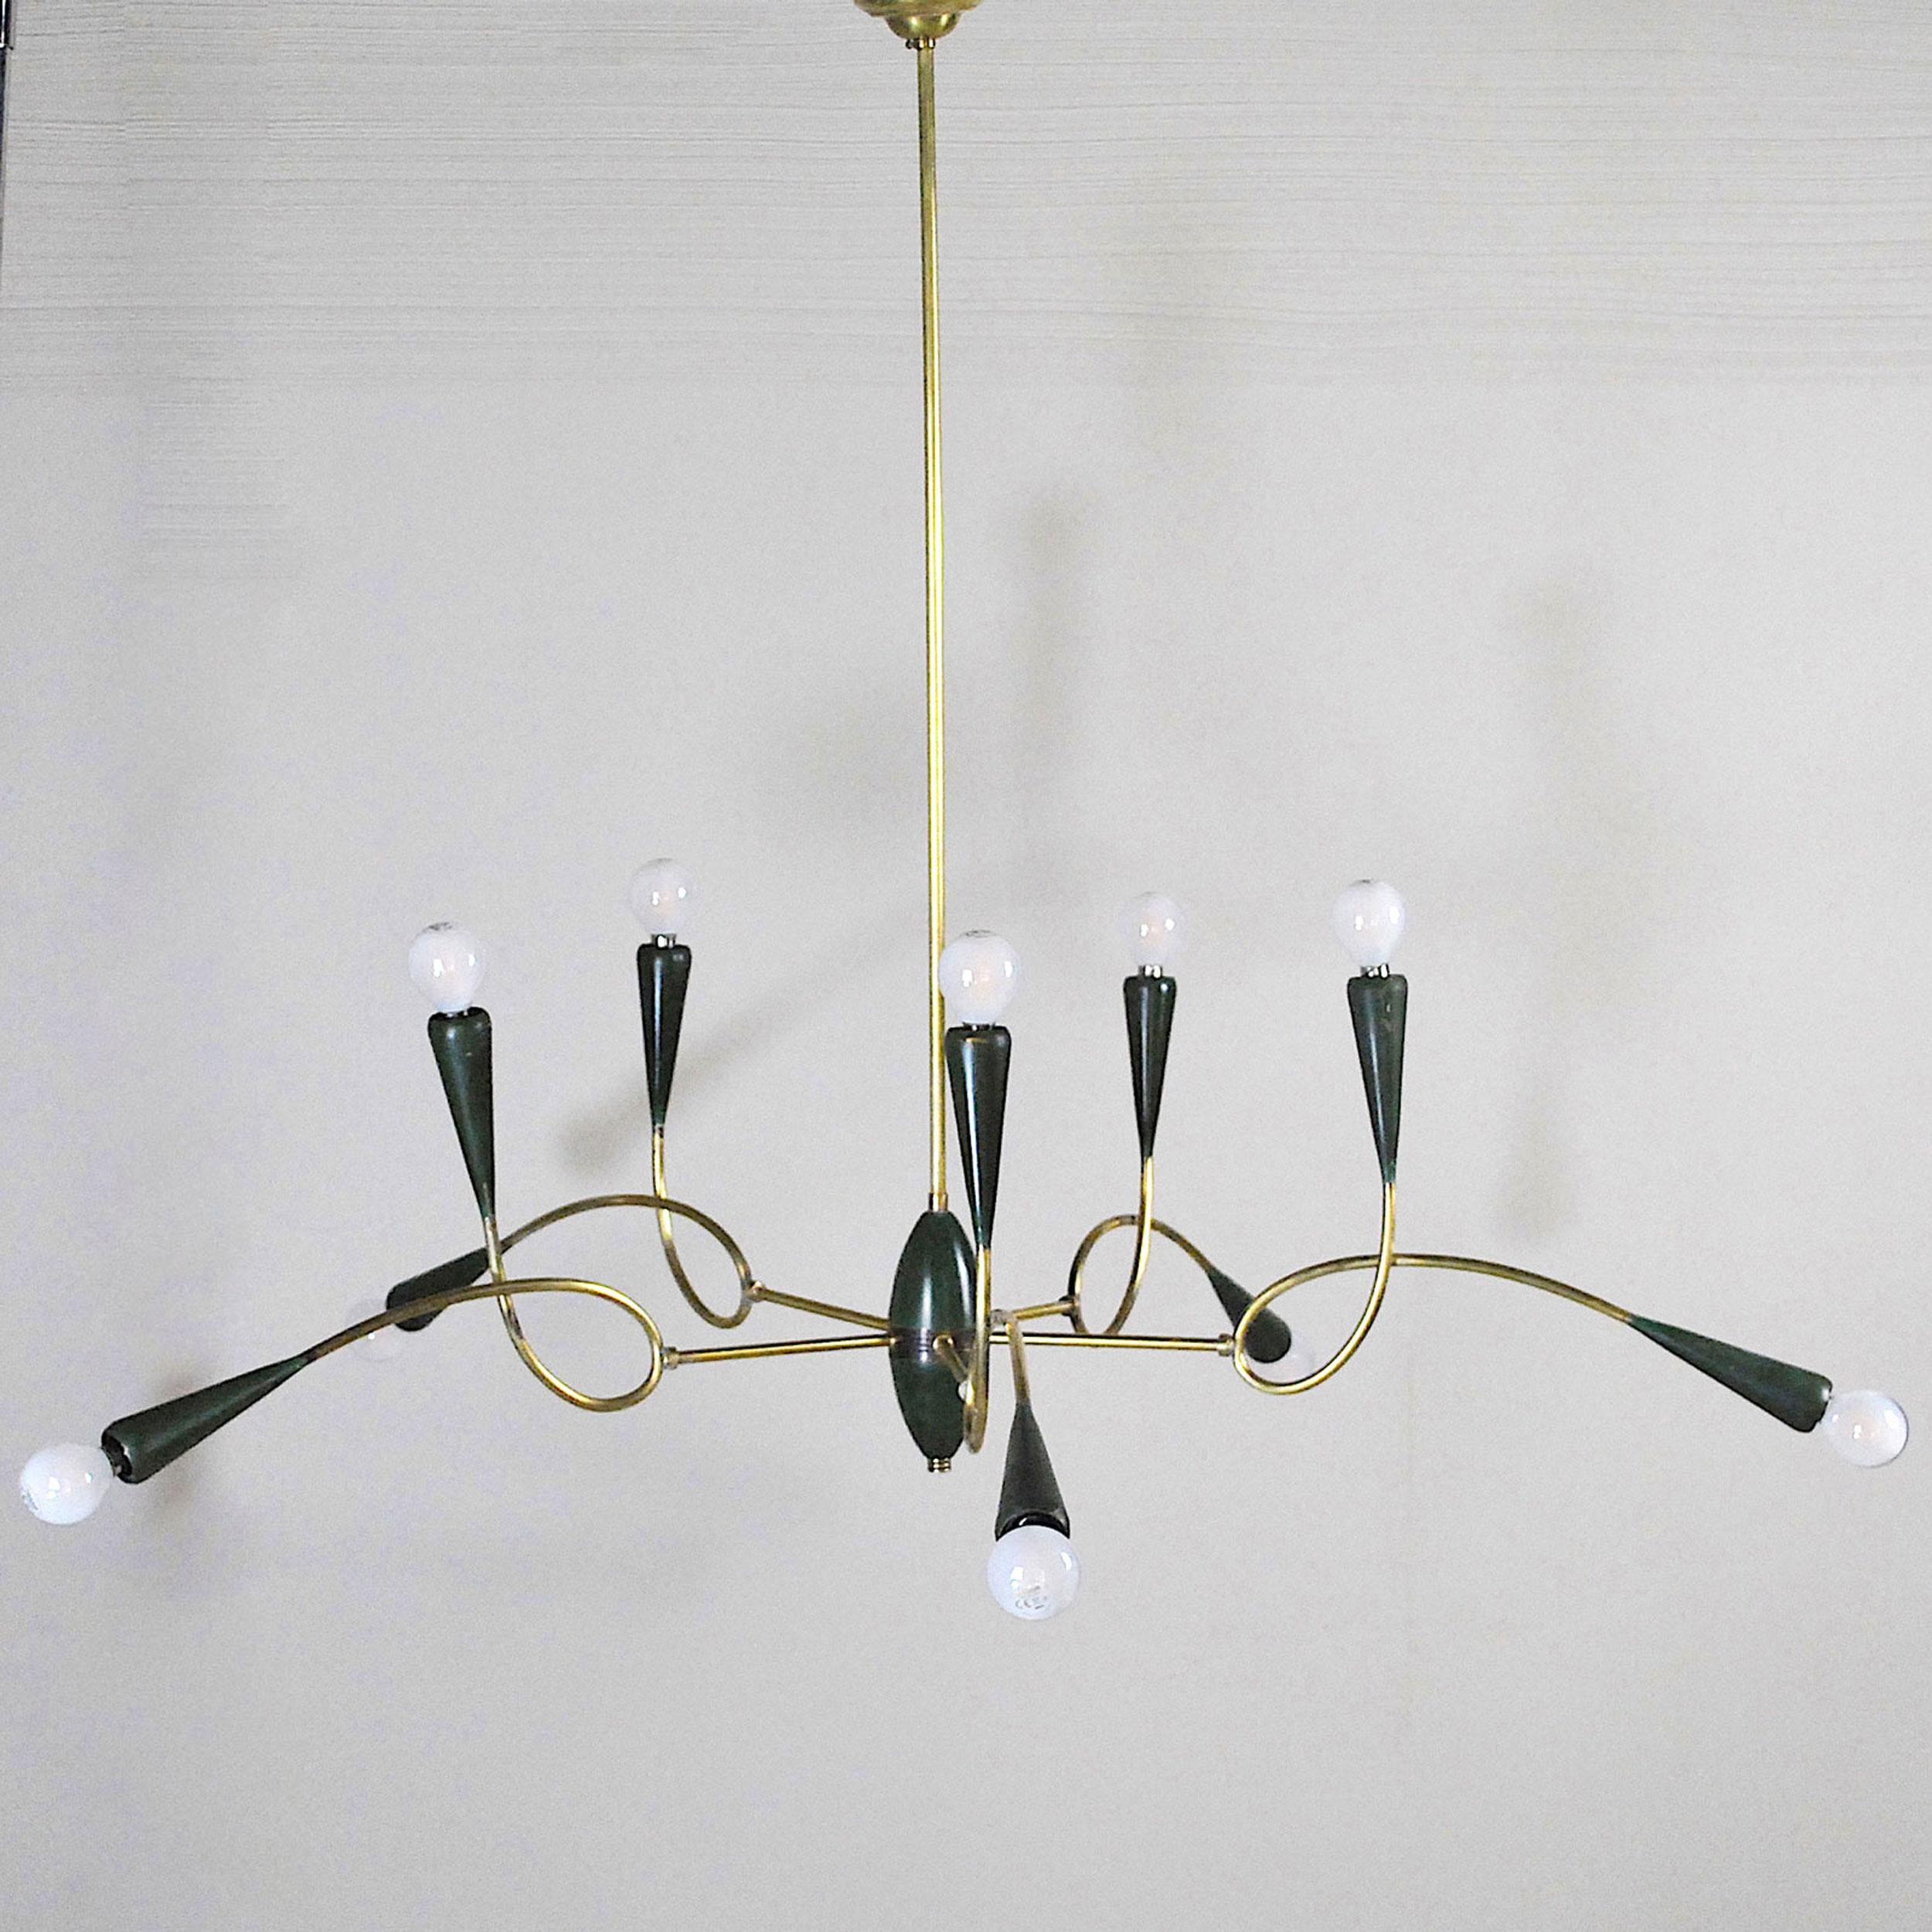 Mid-20th Century Italian Midcentury Chandelier in Brass and Aluminum from 1950s